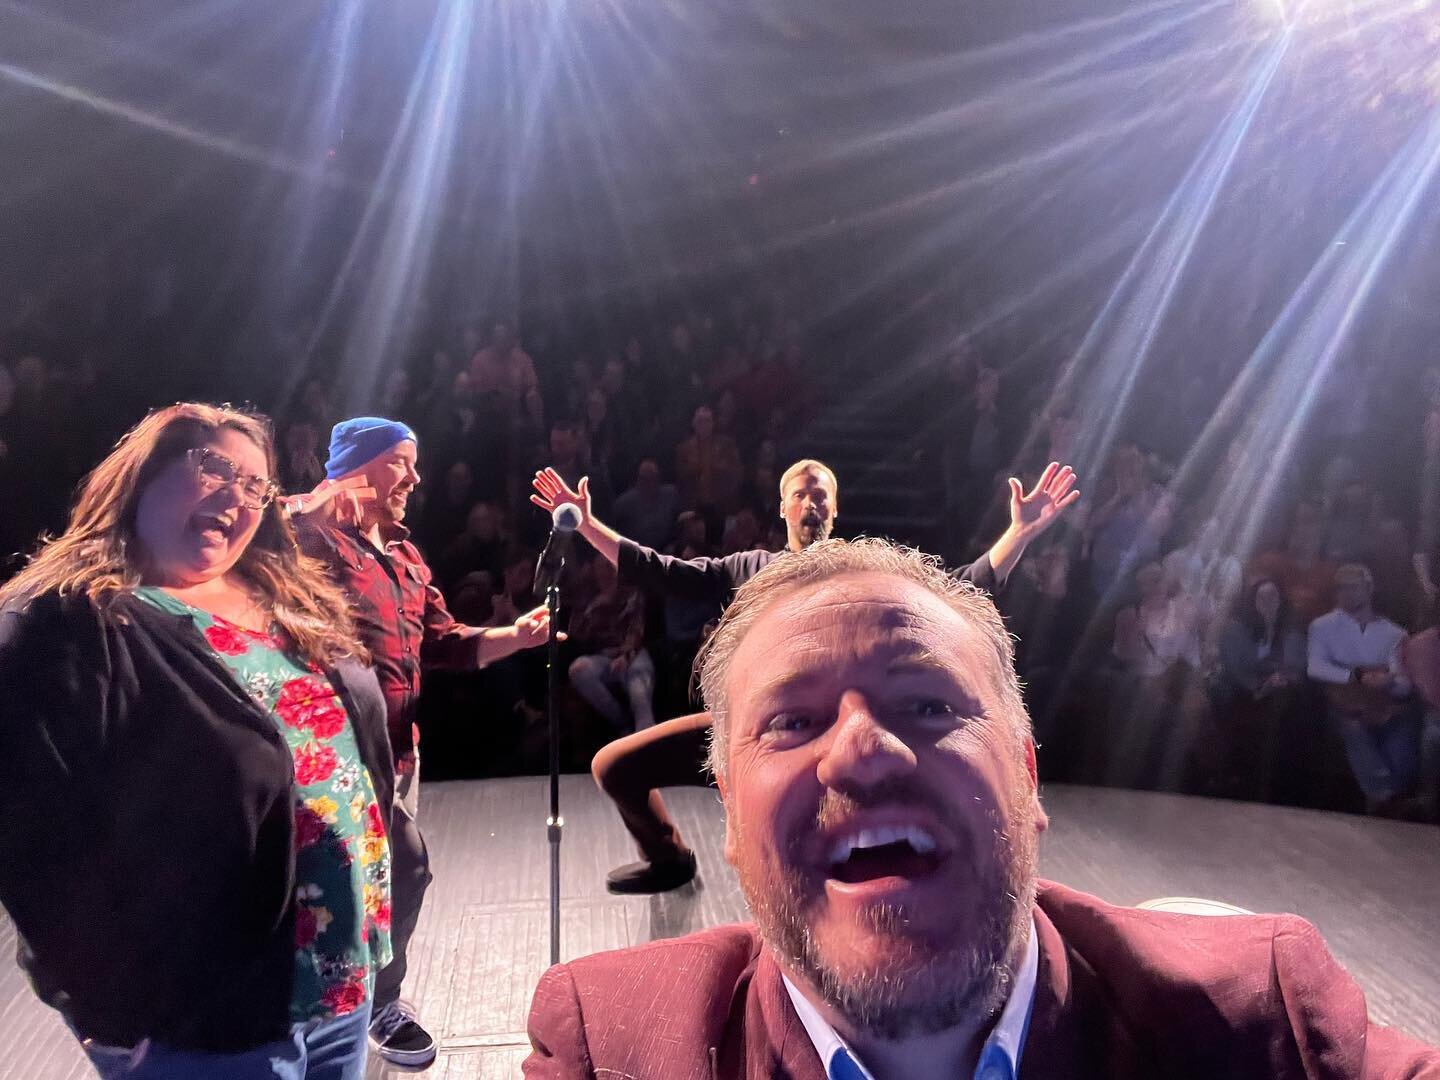 Thanks for a fun night Sudbury, great turnout and a standing O for our first time there. We will be back next year. 
#sudbury #snowedincomedytour #comedy #ontario #comedyshows